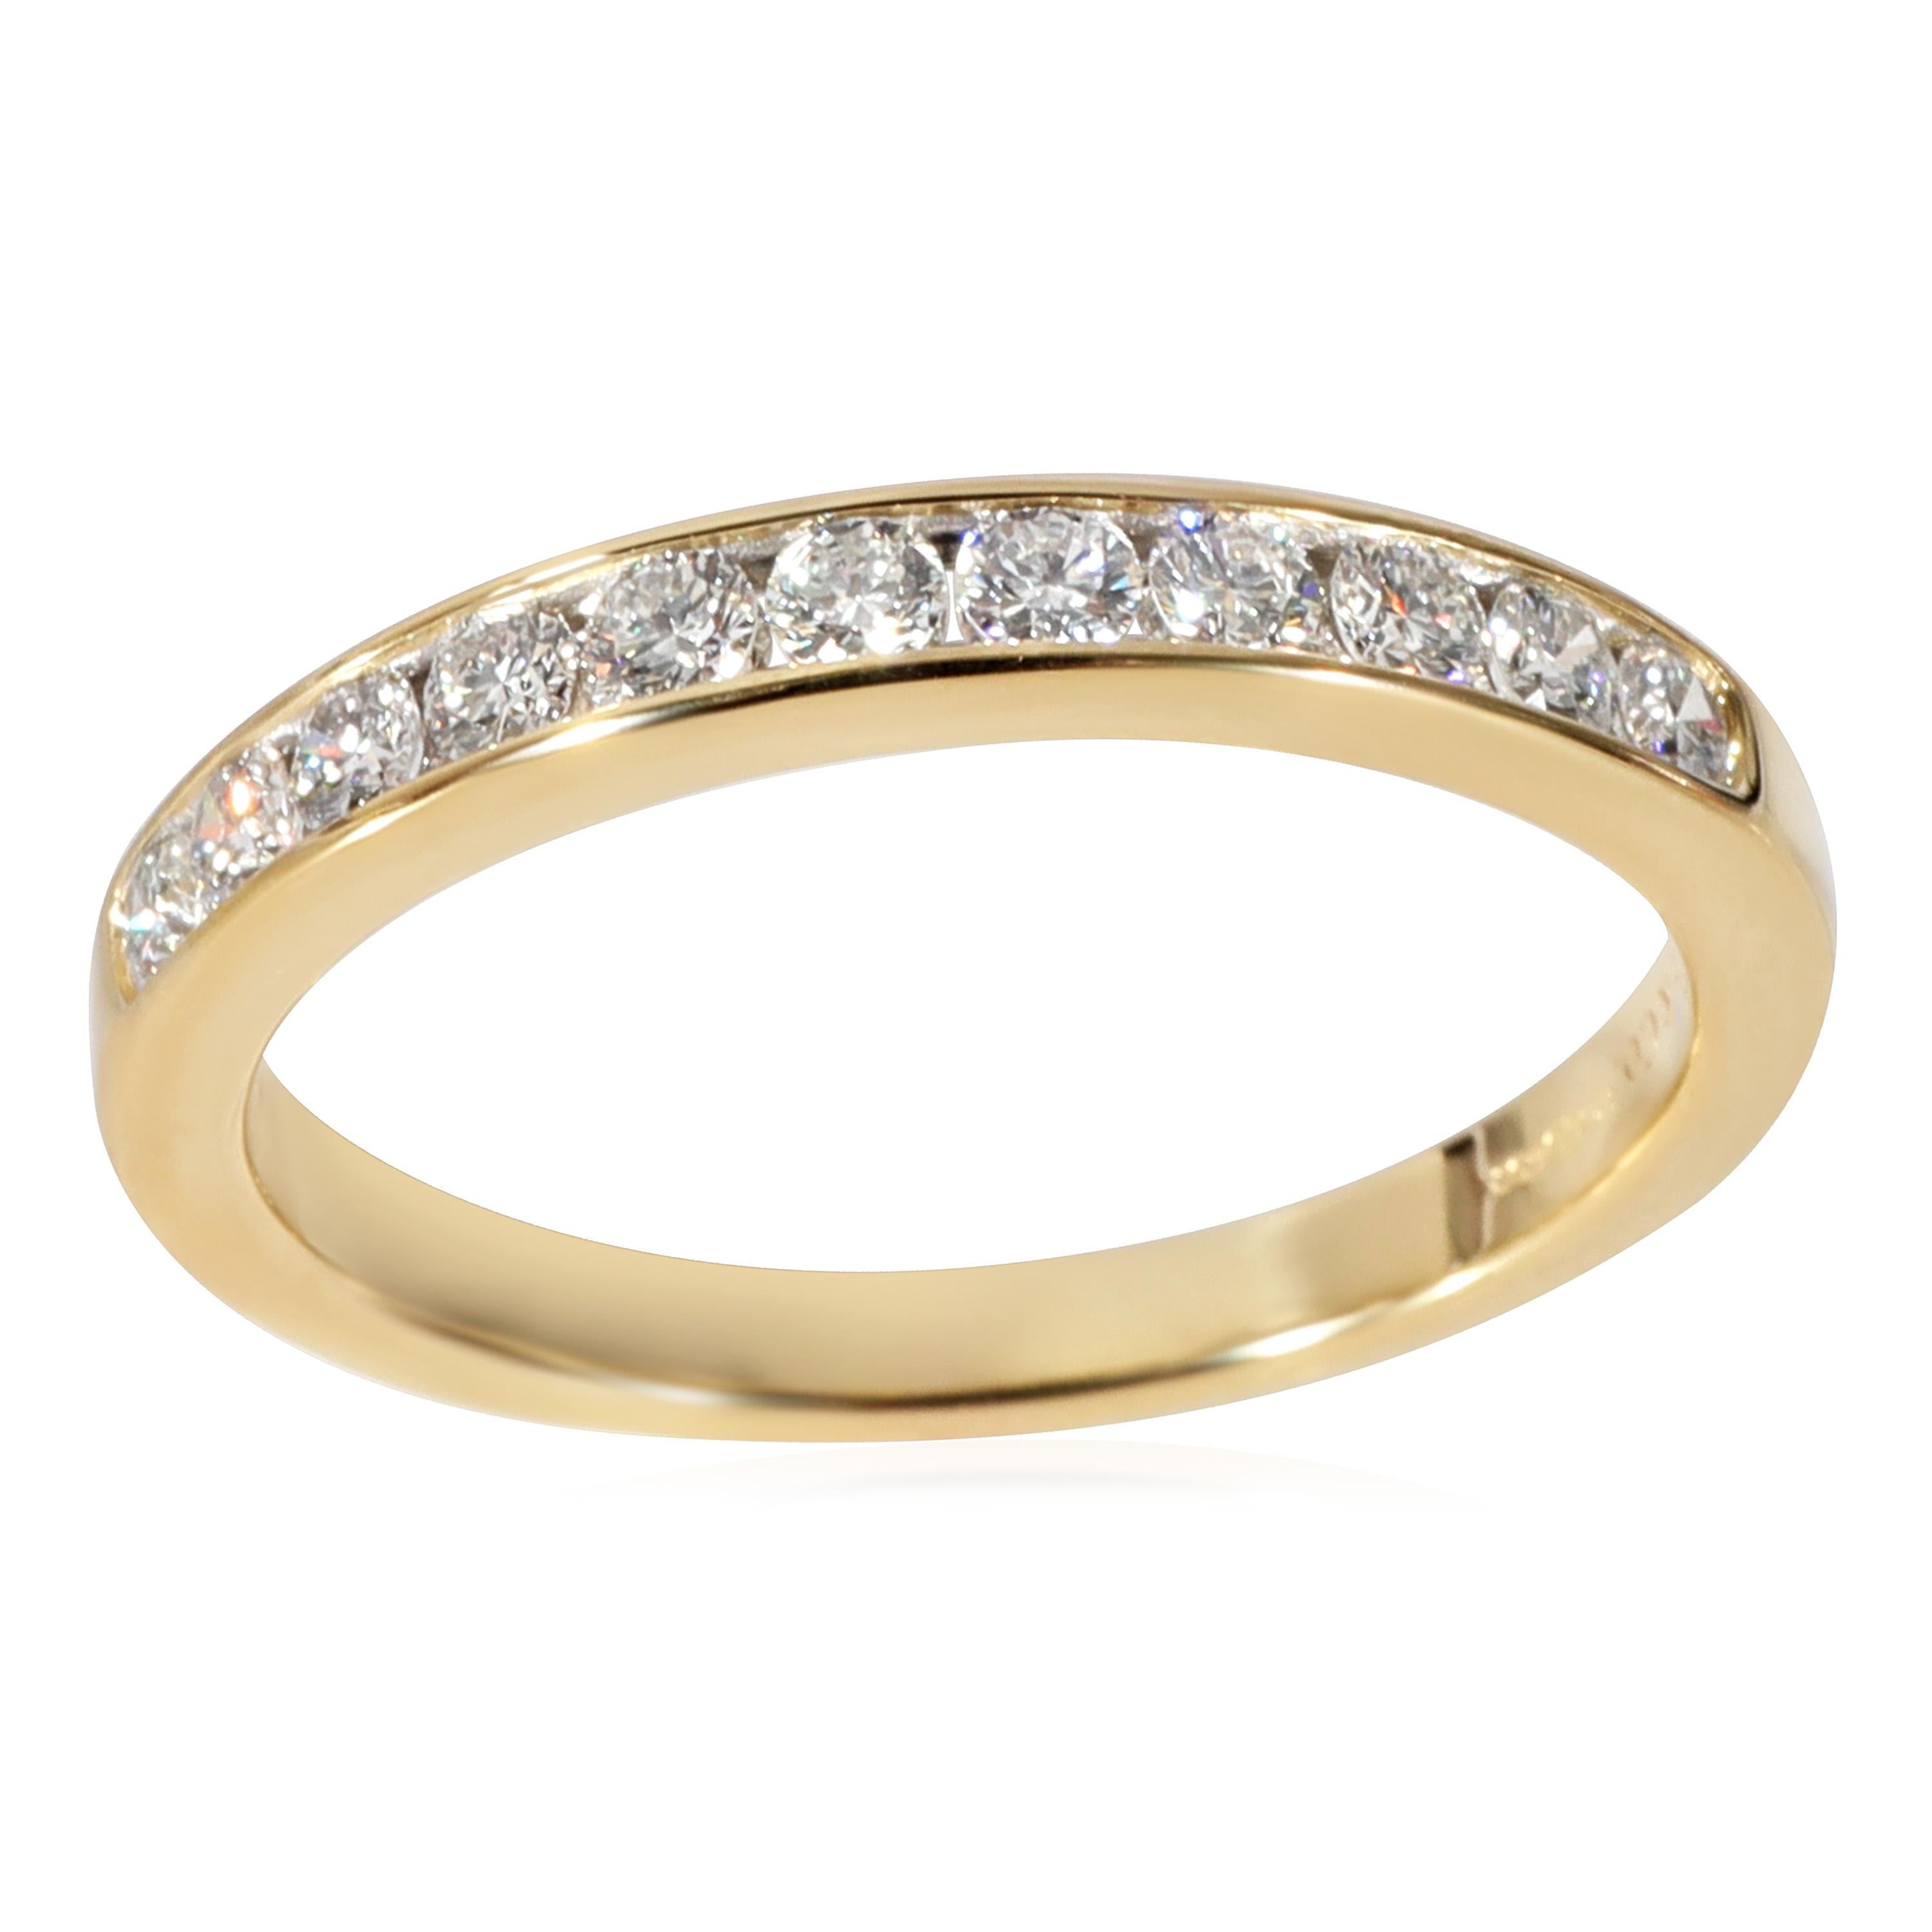 Tiffany & Co. Diamond Wedding Band in 18k Yellow Gold 0.39 Ctw For Sale 1